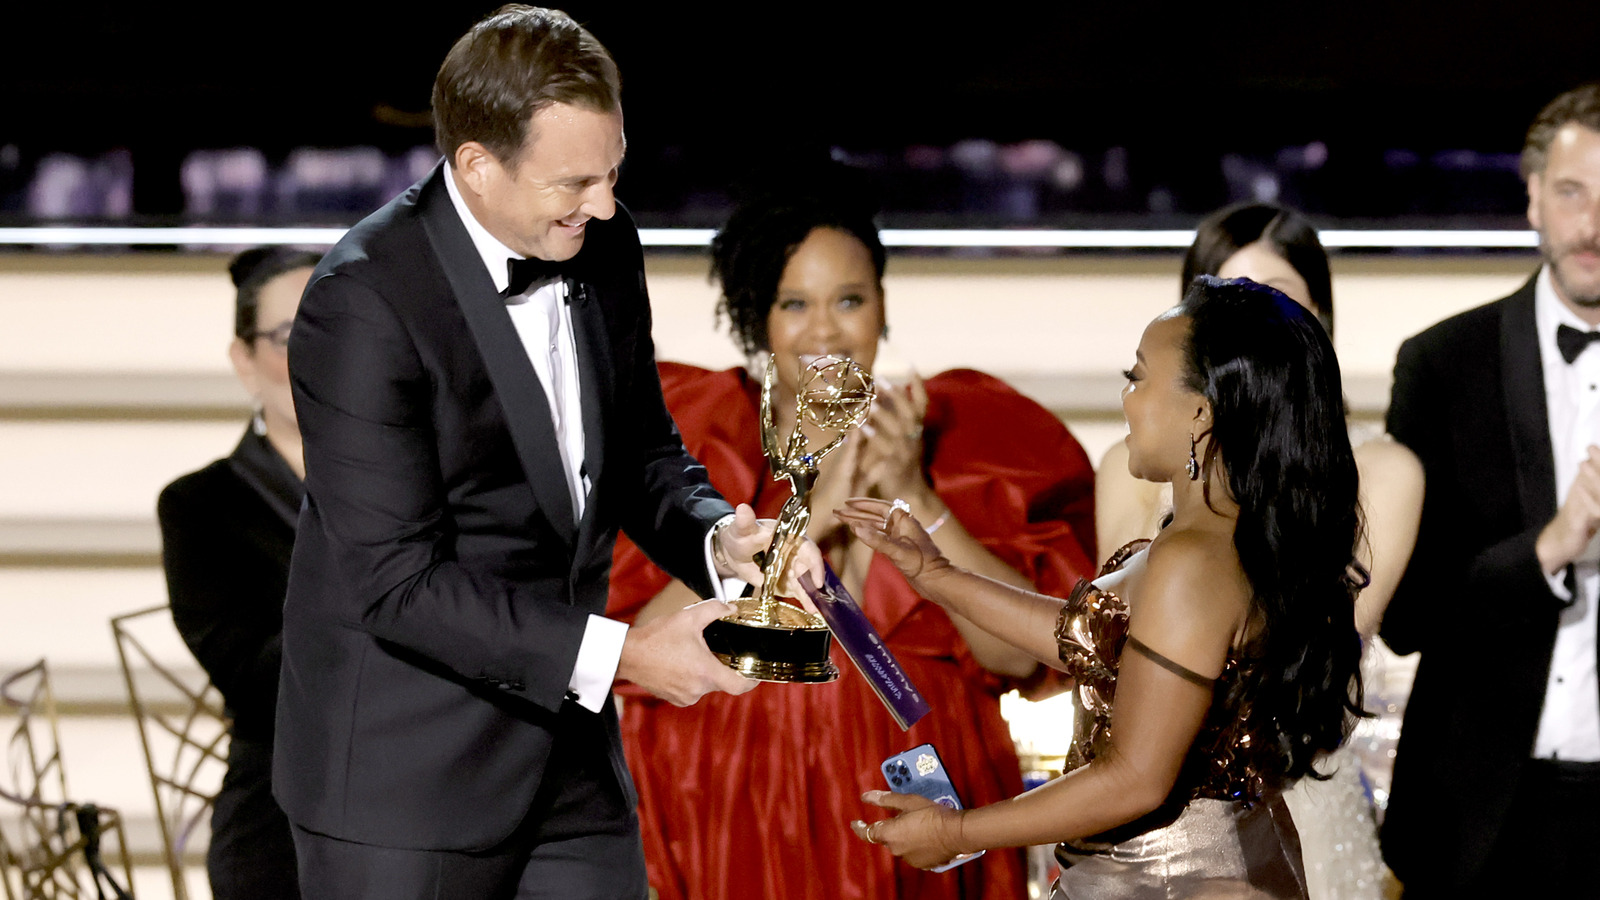 Hollywood Strikes Push Emmys Date For The First Time Since September 11th Attacks – Looper